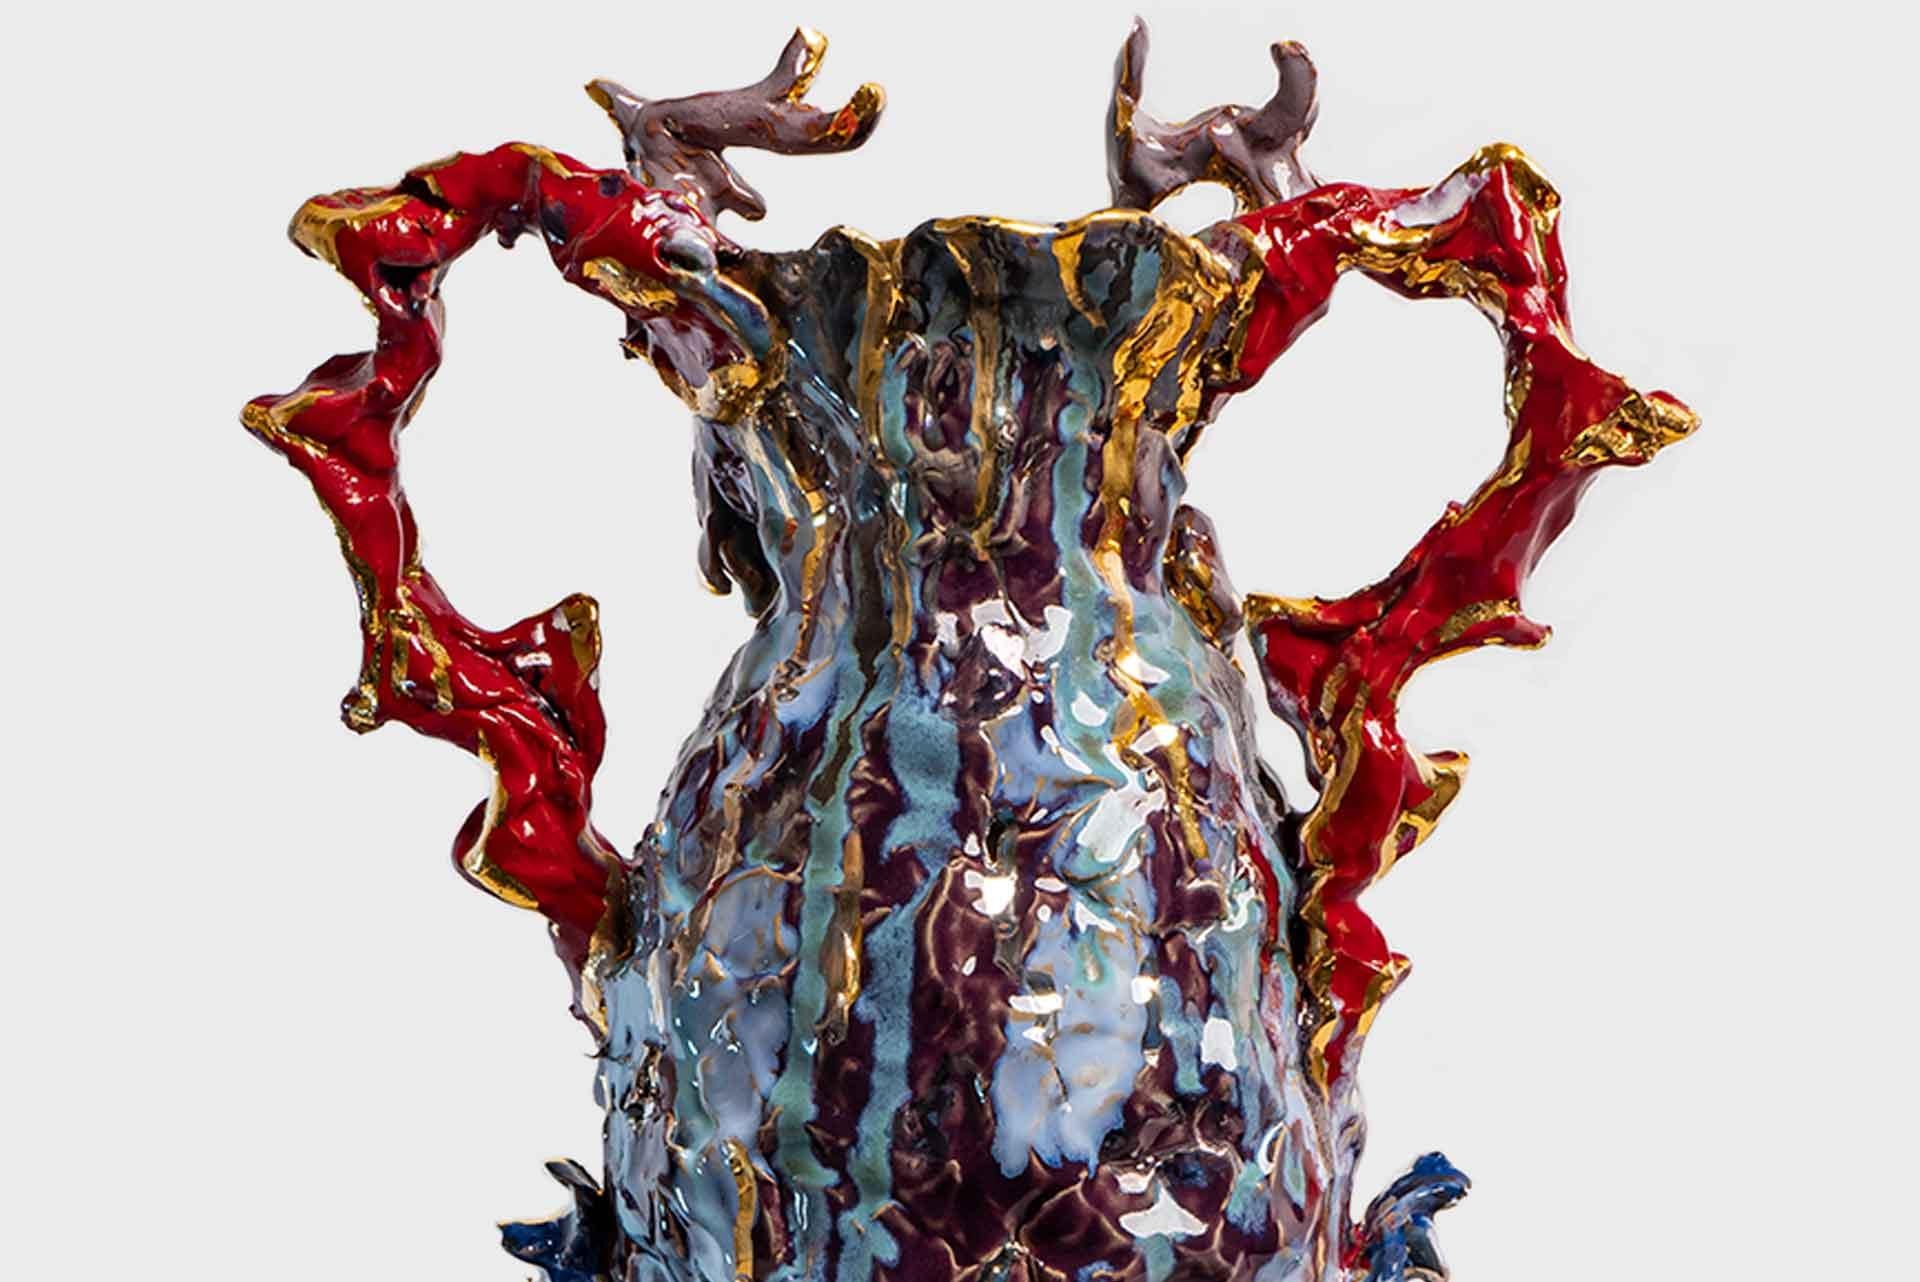 Ceramic vase model “Purple Serenade”
From “Scary Pots” series 
Manufactured by Faye Hadfield 
UK, 2022 
Stoneware ceramic, 24k gold lustre, platinum lustre, blue lustre

The series “Scary Pots”, was born from a desire to push boundaries and